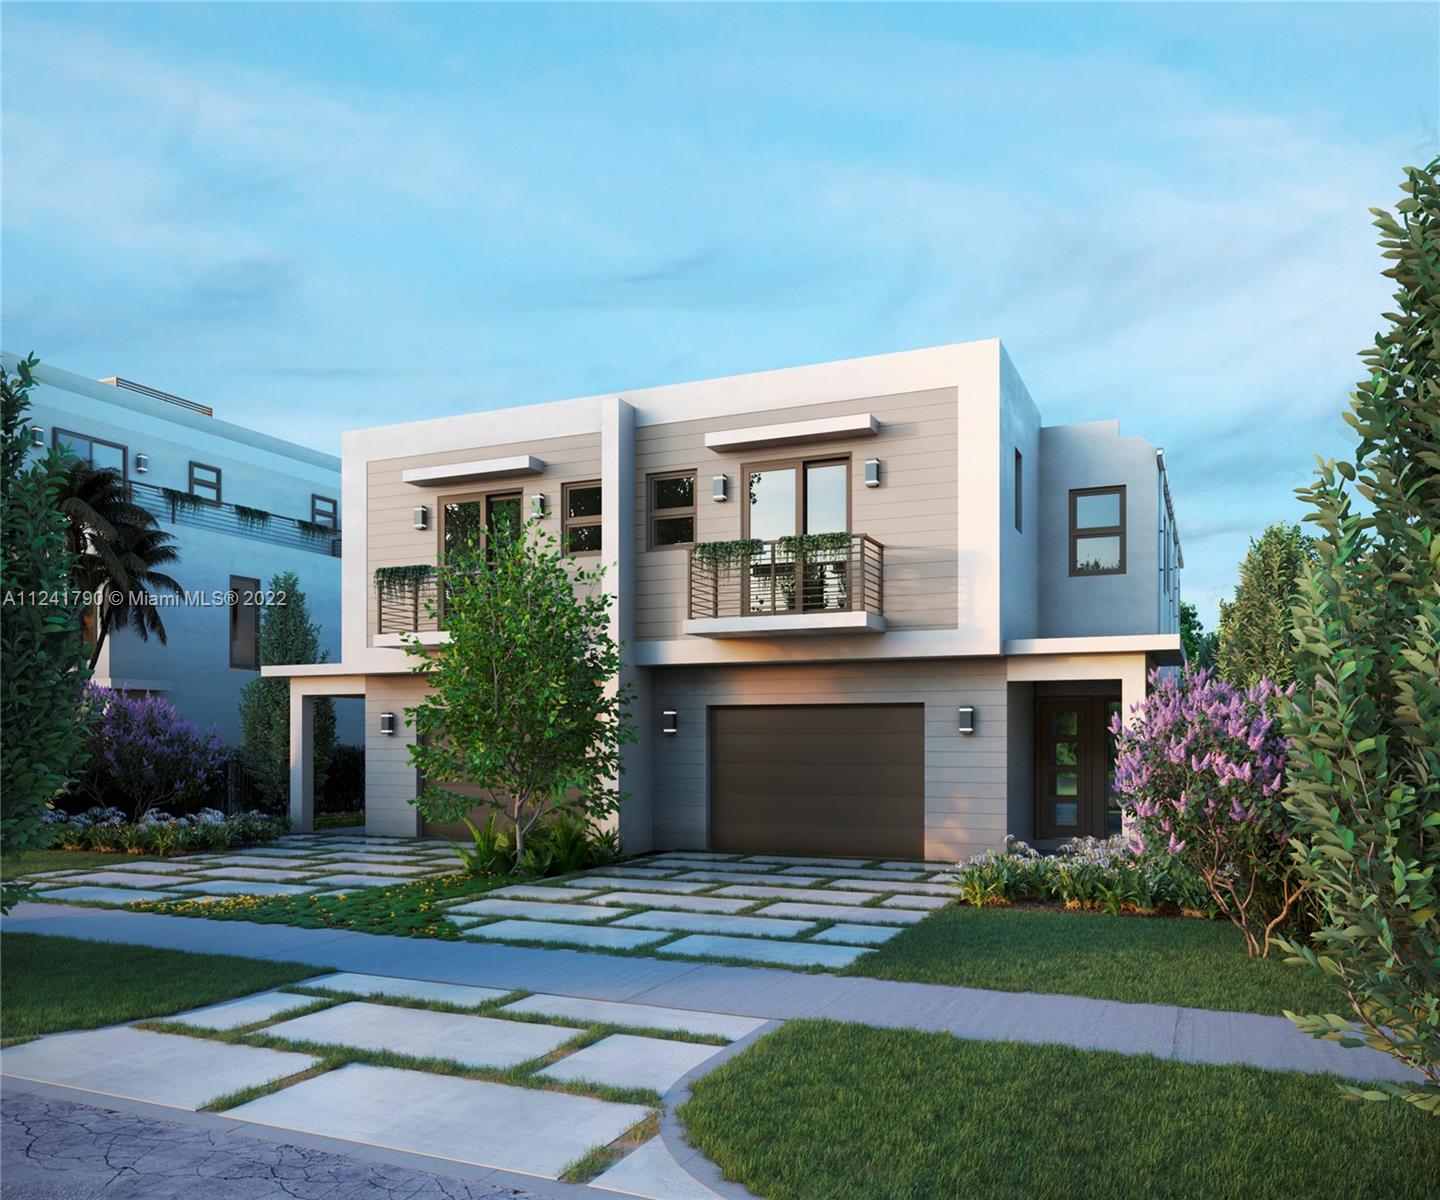 NEW CONSTRUCTION TOWNHOUSE in Victoria Park. Beautiful neighborhood few blocks away from Las Olas Blvd. Turnkey project. 4 bedrooms 3.5 bathrooms, 2482sf, private pool, one covered parking garage, tile floors. The opportunity to live in one of the most desirable areas in Fort Lauderdale. Expected January 2023